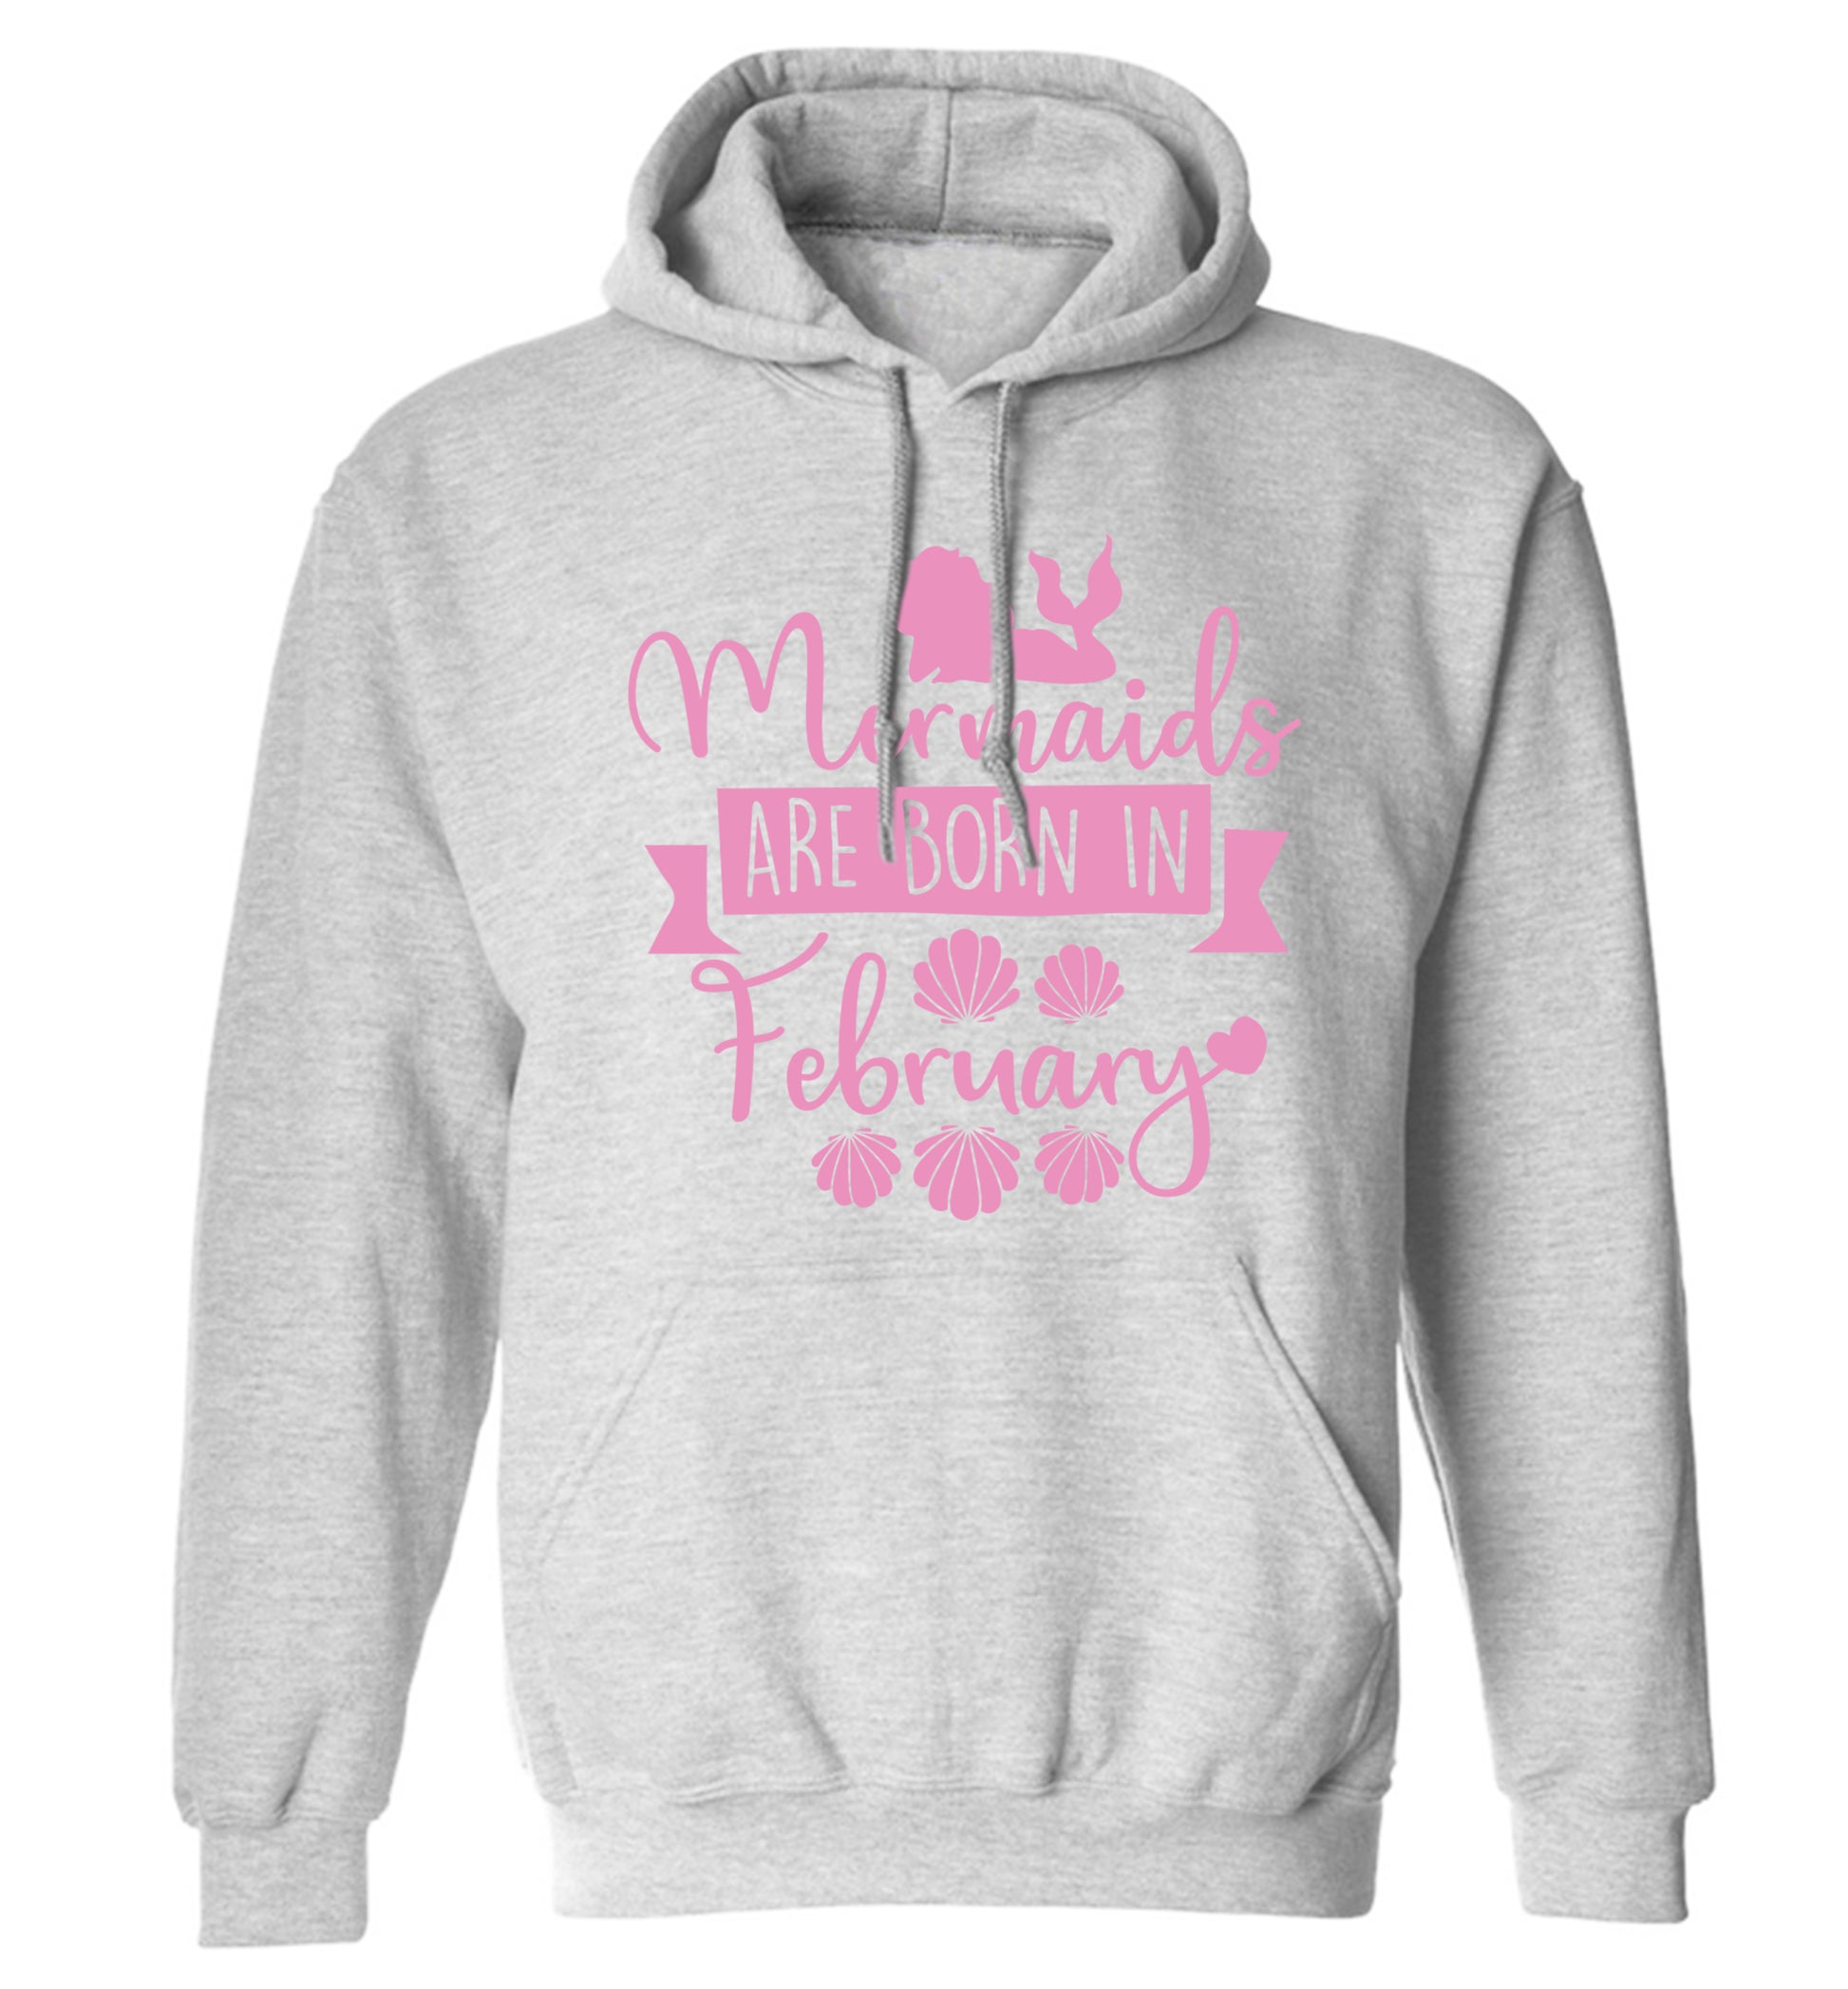 Mermaids are born in February adults unisex grey hoodie 2XL